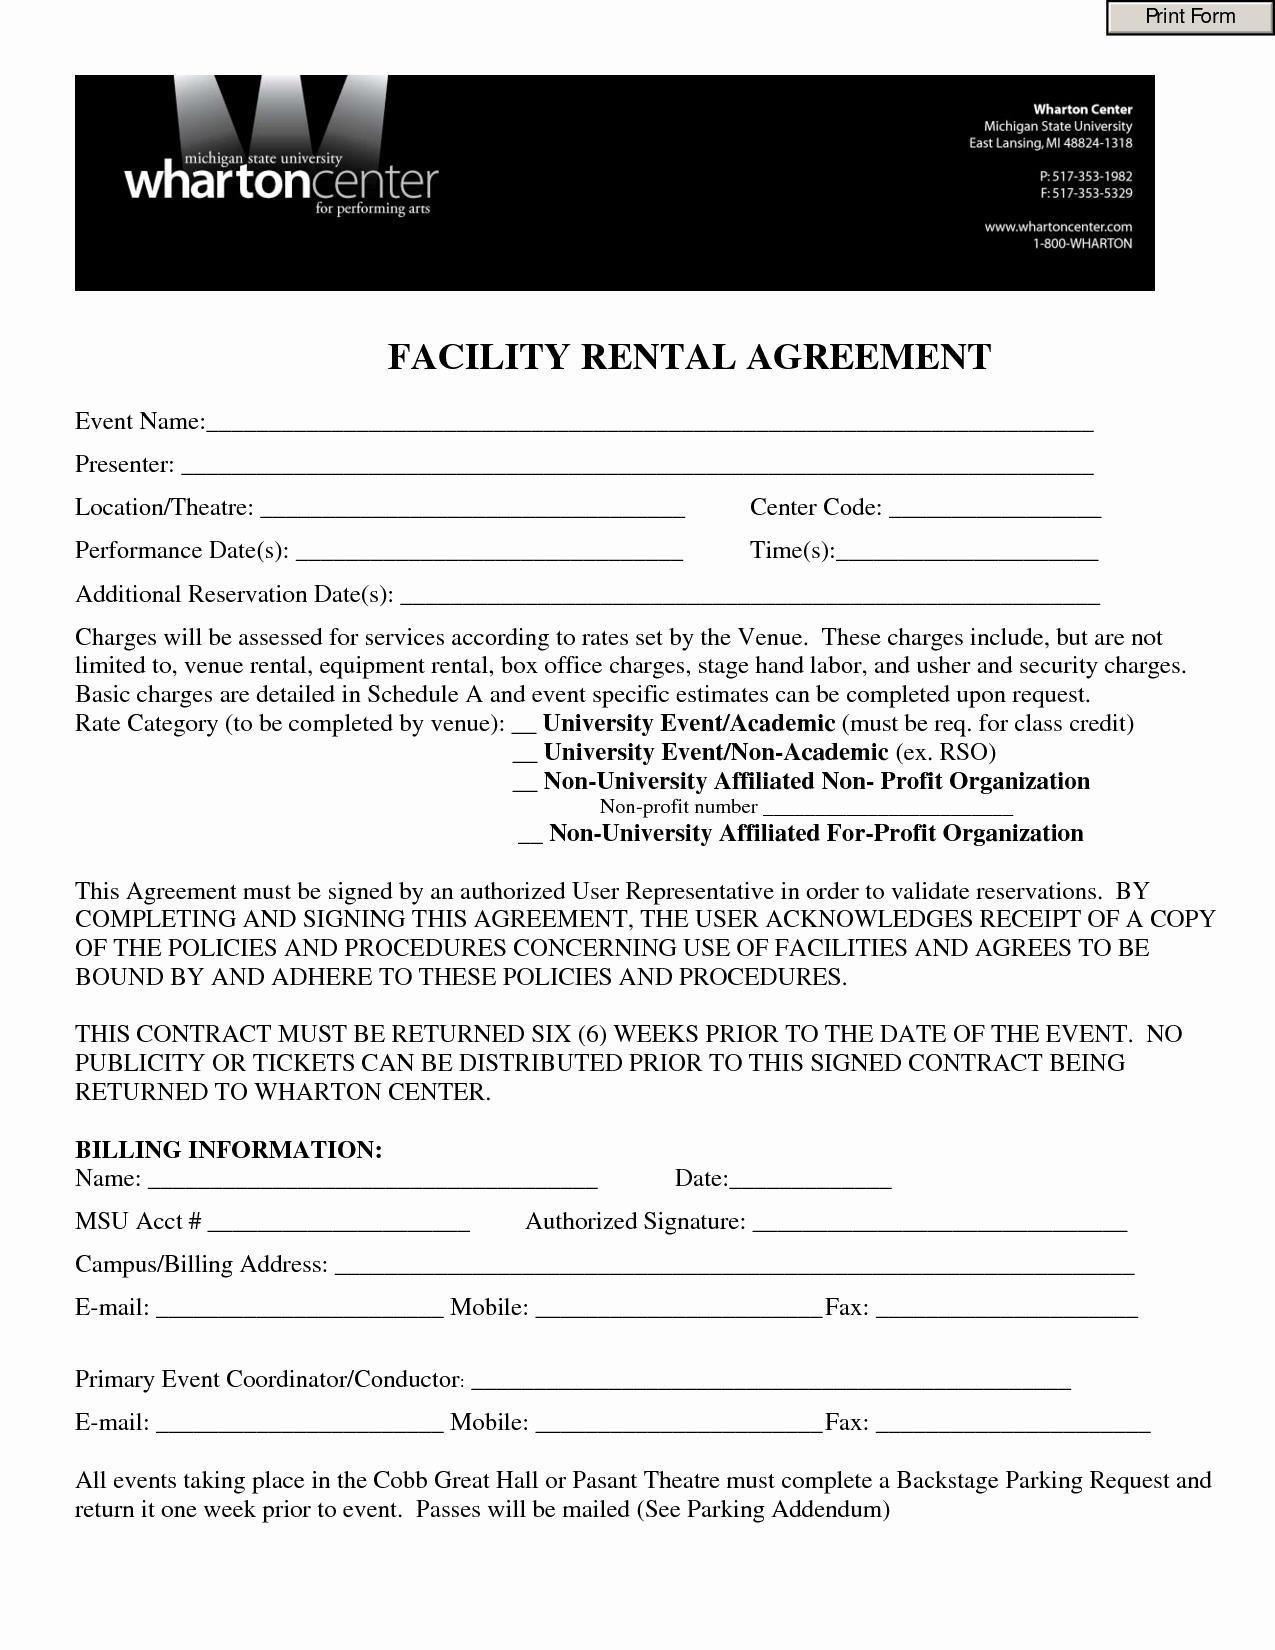 Facility Rental Agreement Template Awesome 10 Best Of Facility Rental Agreement Template